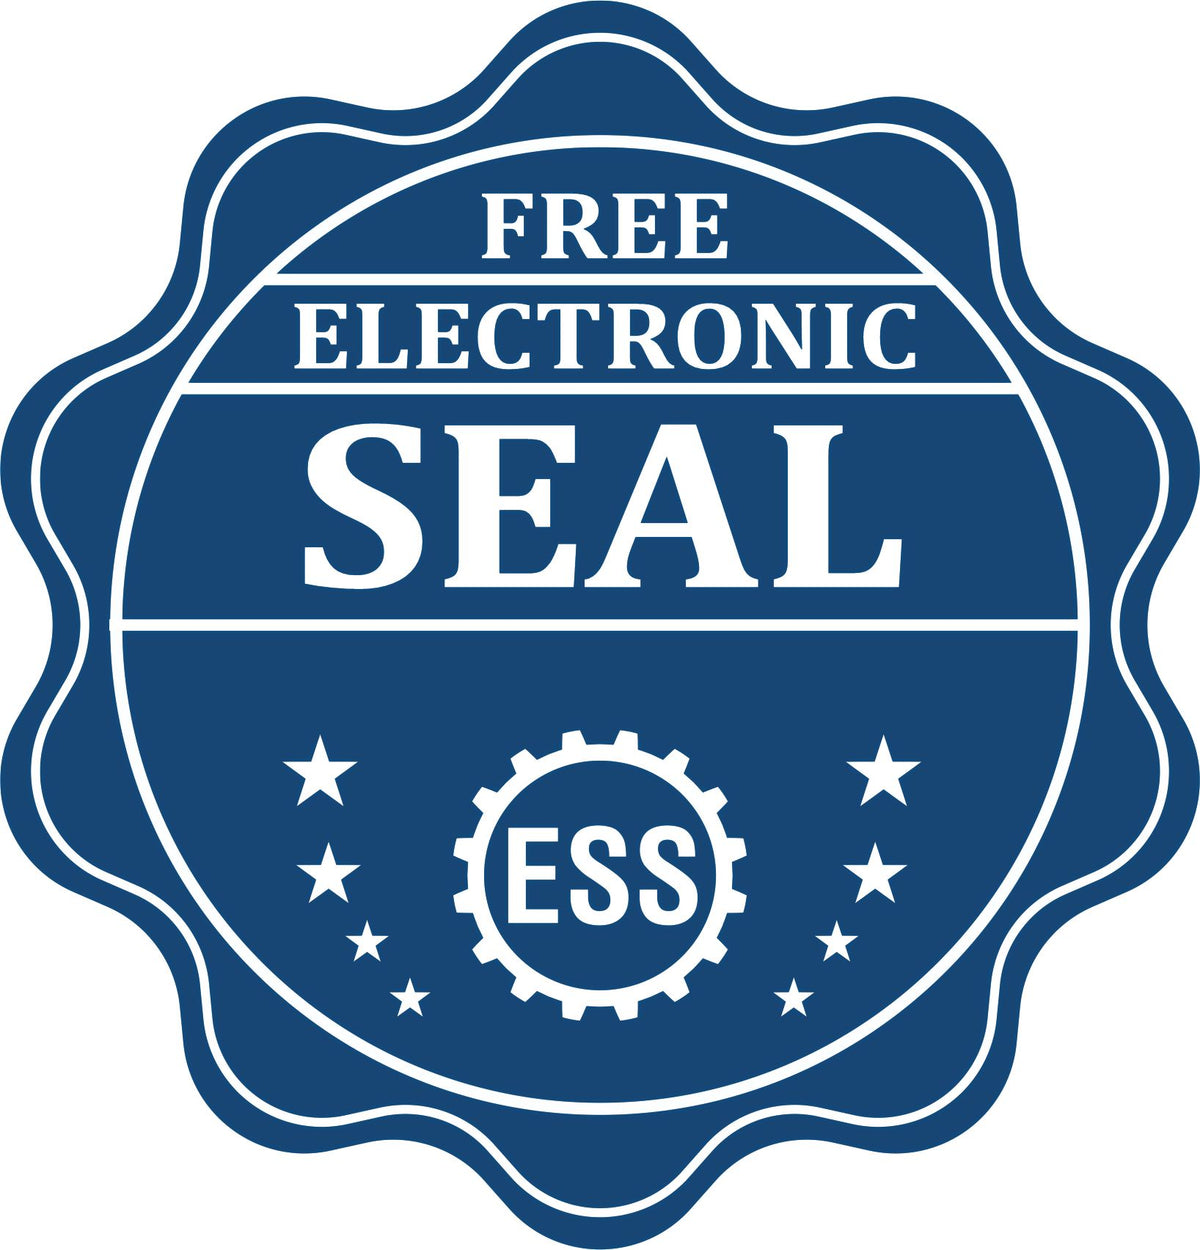 A badge showing a free electronic seal for the Super Slim Missouri Notary Public Stamp with stars and the ESS gear on the emblem.